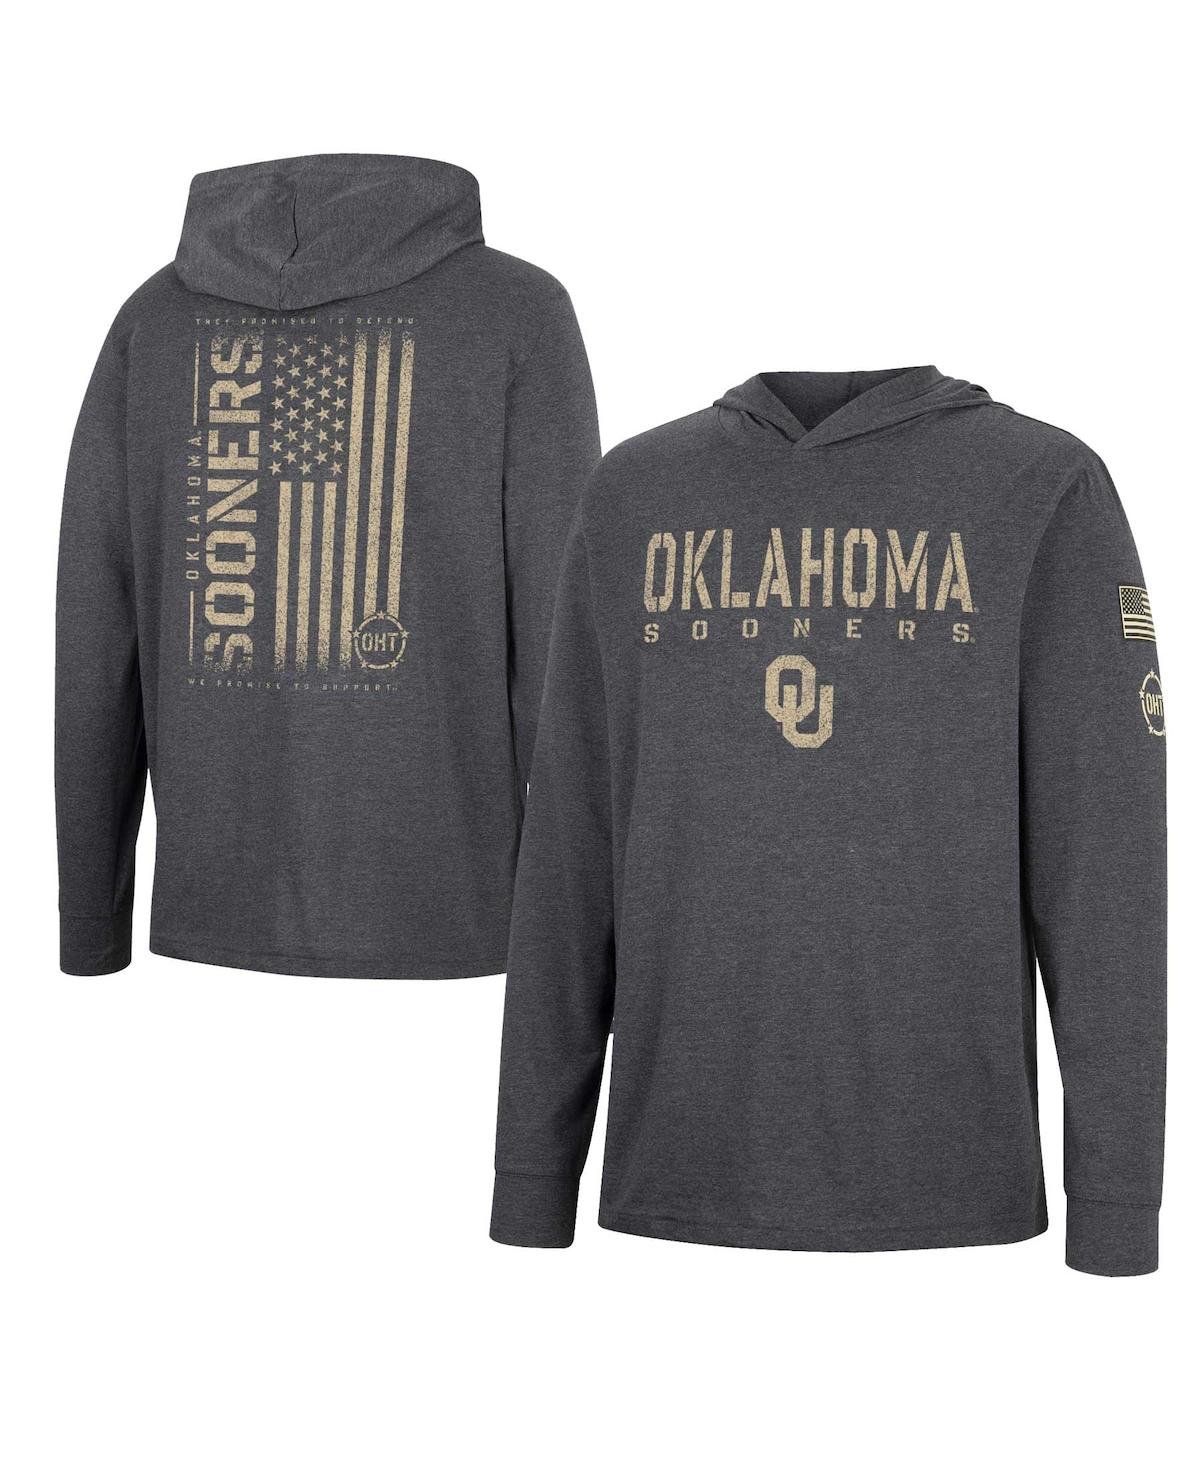 Colosseum Men's  Charcoal Oklahoma Sooners Team Oht Military-inspired Appreciation Hoodie Long Sleeve